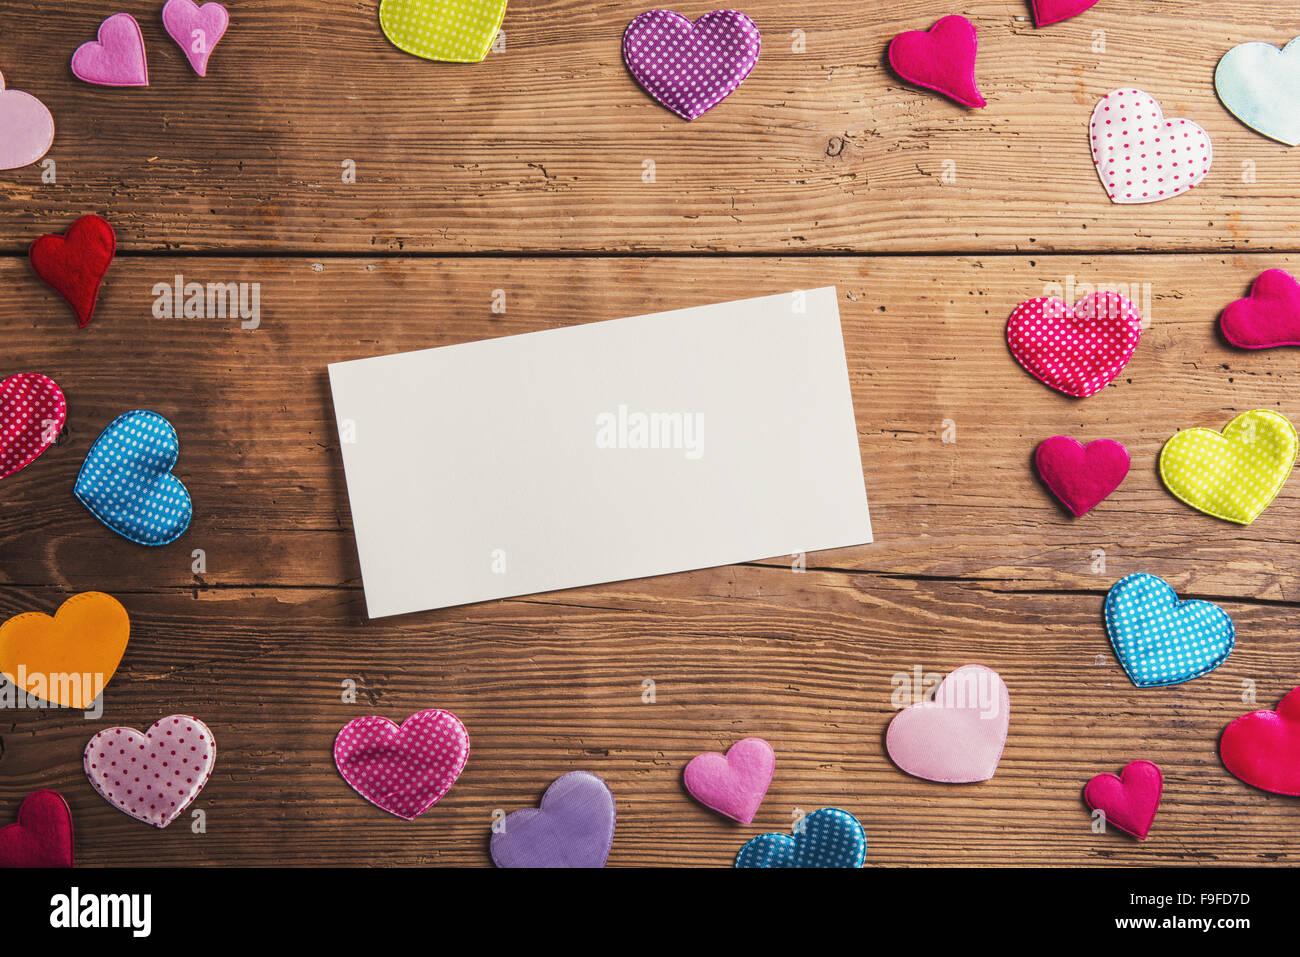 Empty paper sheet and colorful fabric hearts. Studio shot on wooden background. Stock Photo